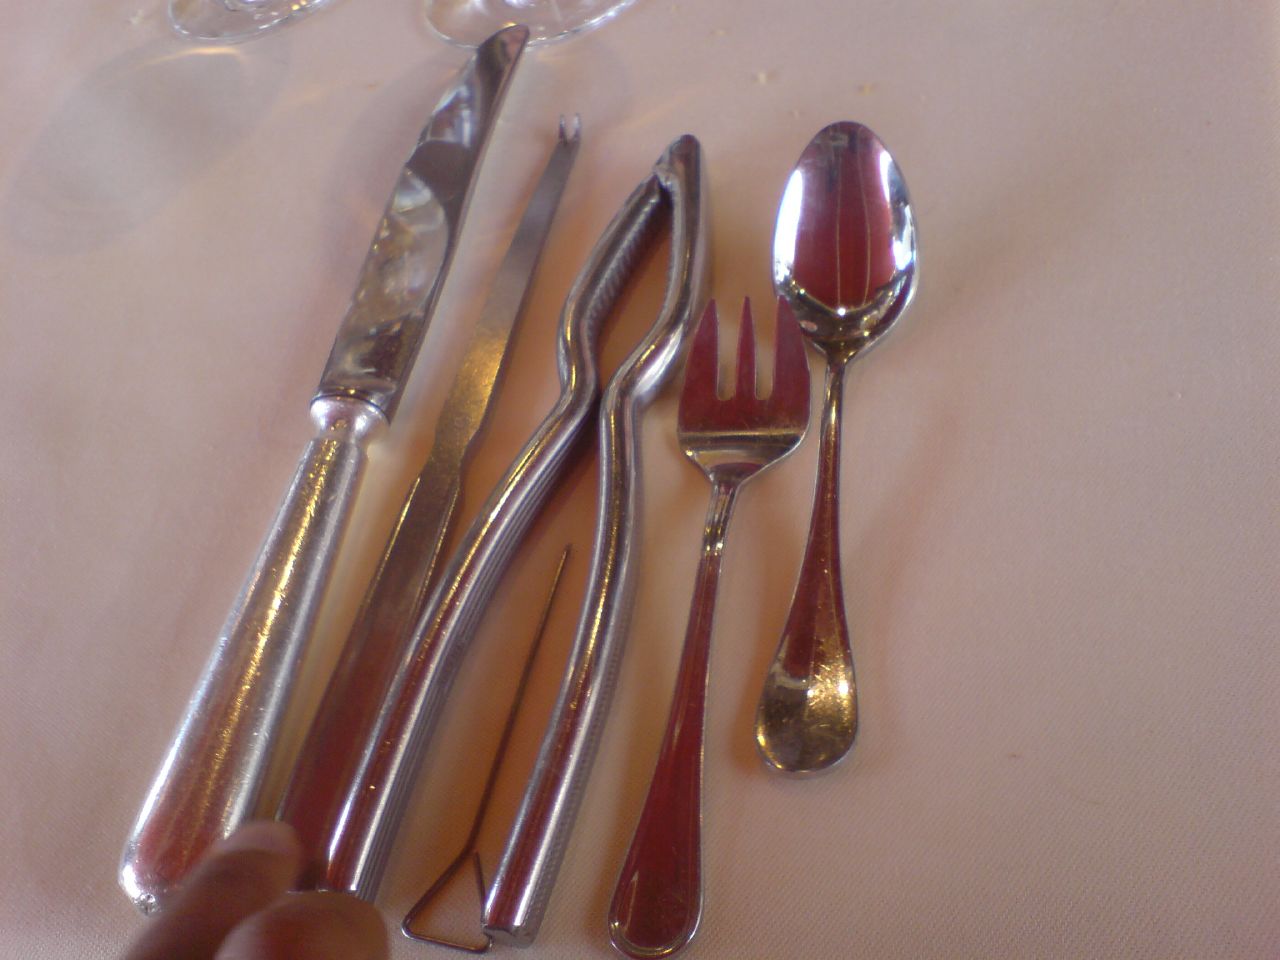 a table topped with metal forks and silverware